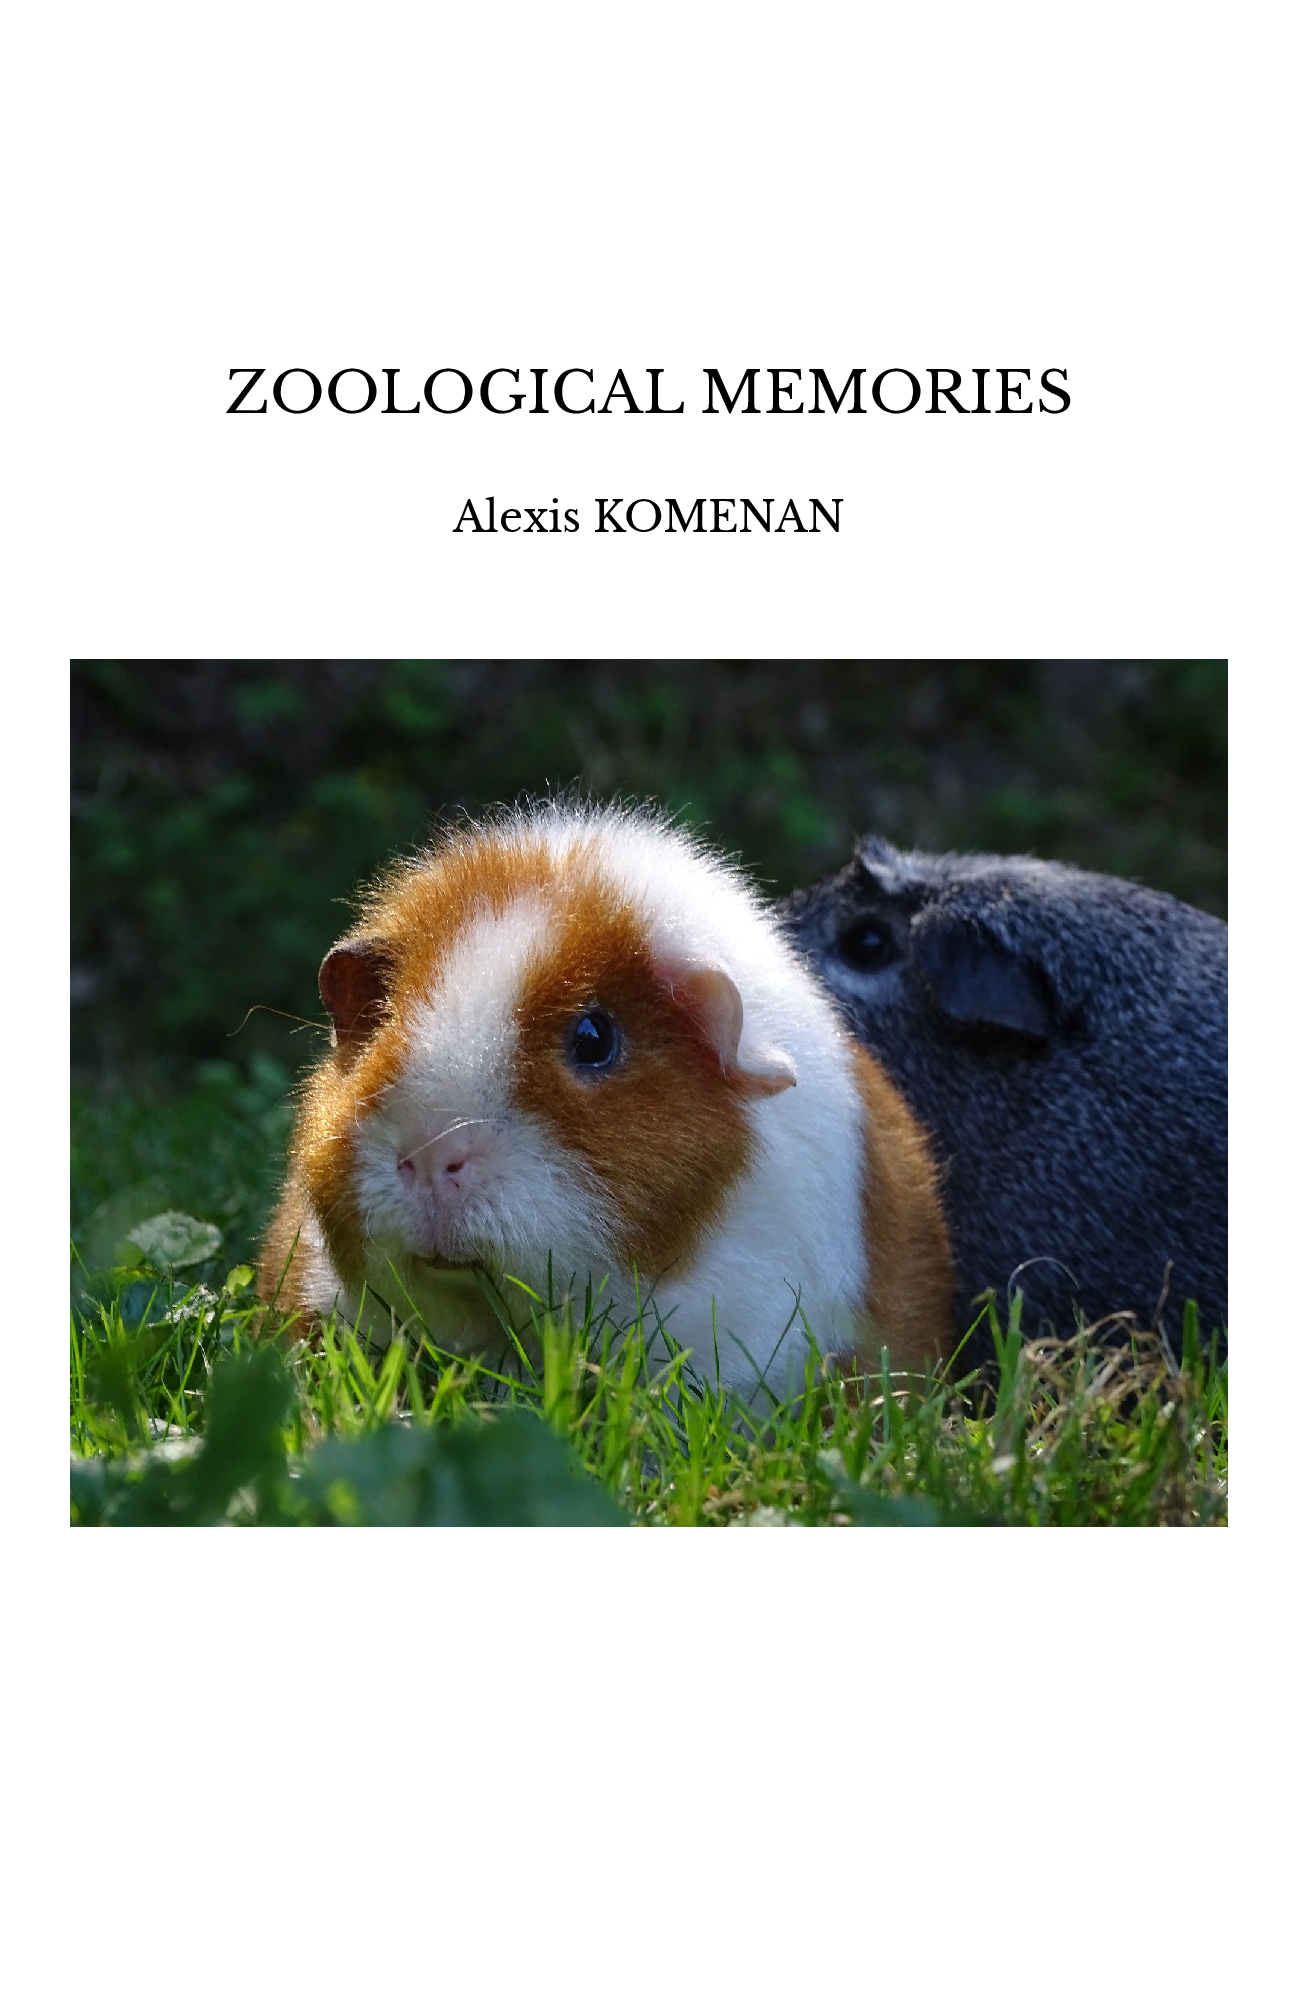 ZOOLOGICAL MEMORIES